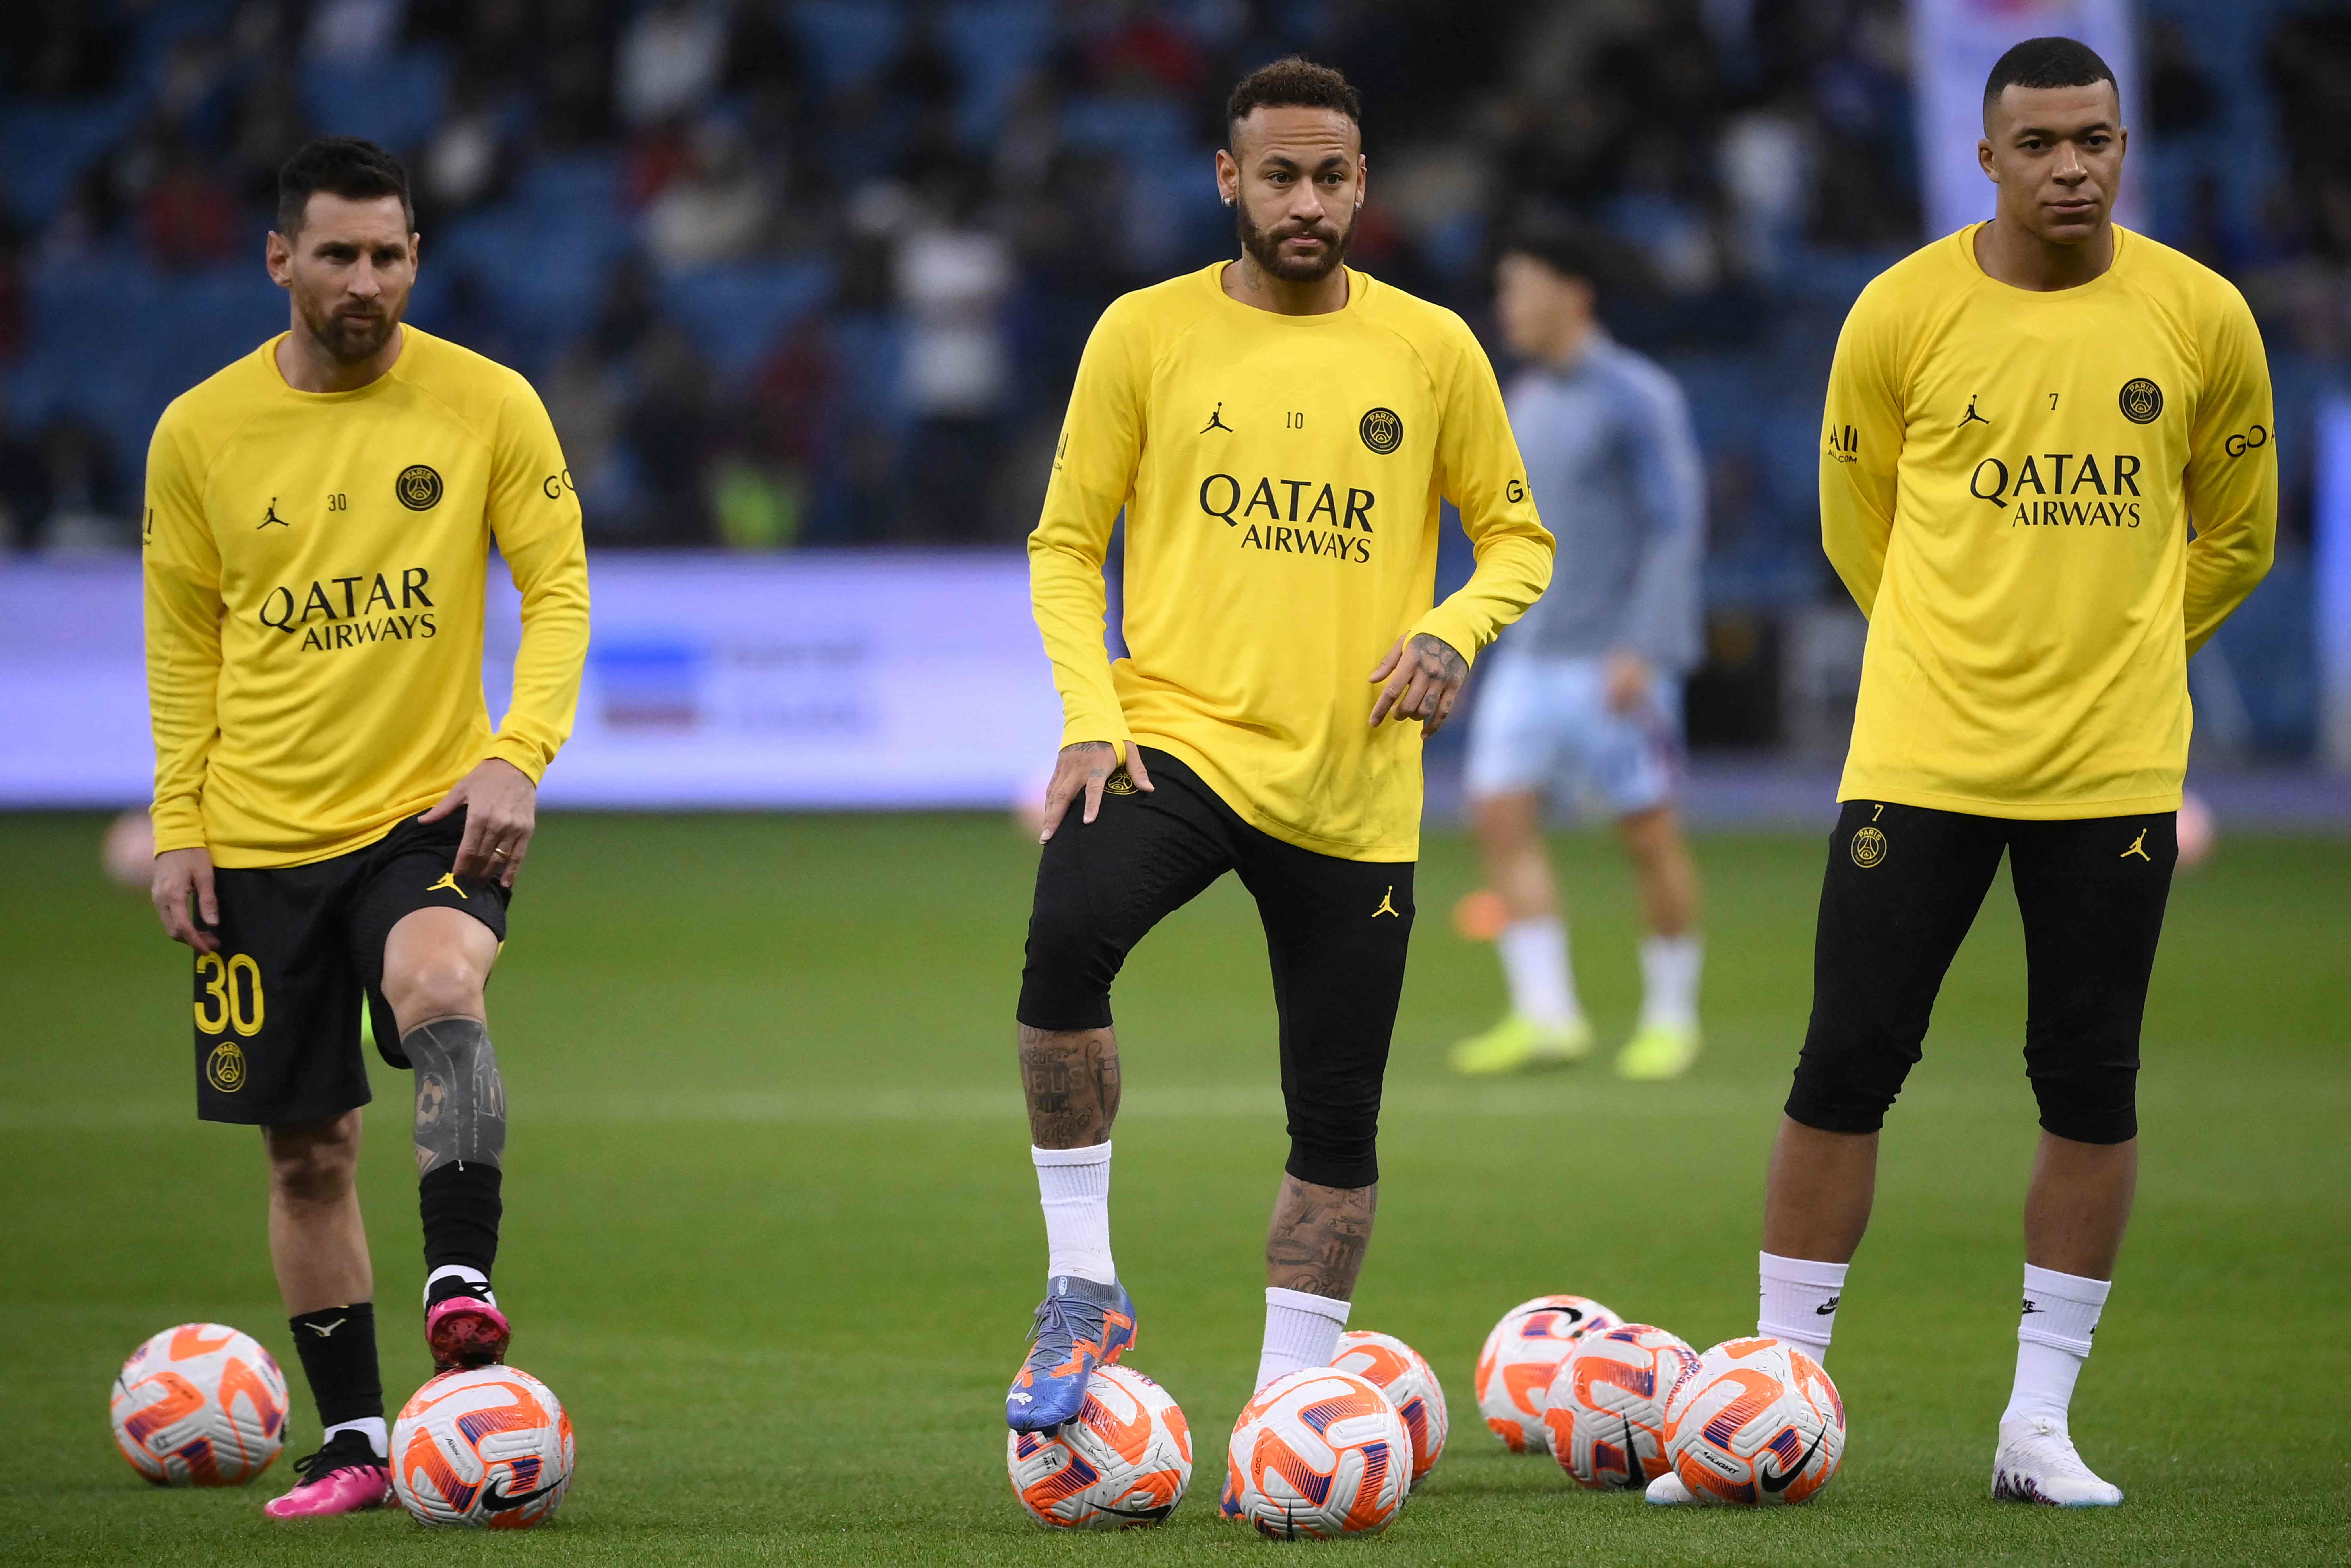 Lionel Messi and Neymar 'ready to quit PSG' amid Kylian Mbappe tensions |  The Independent